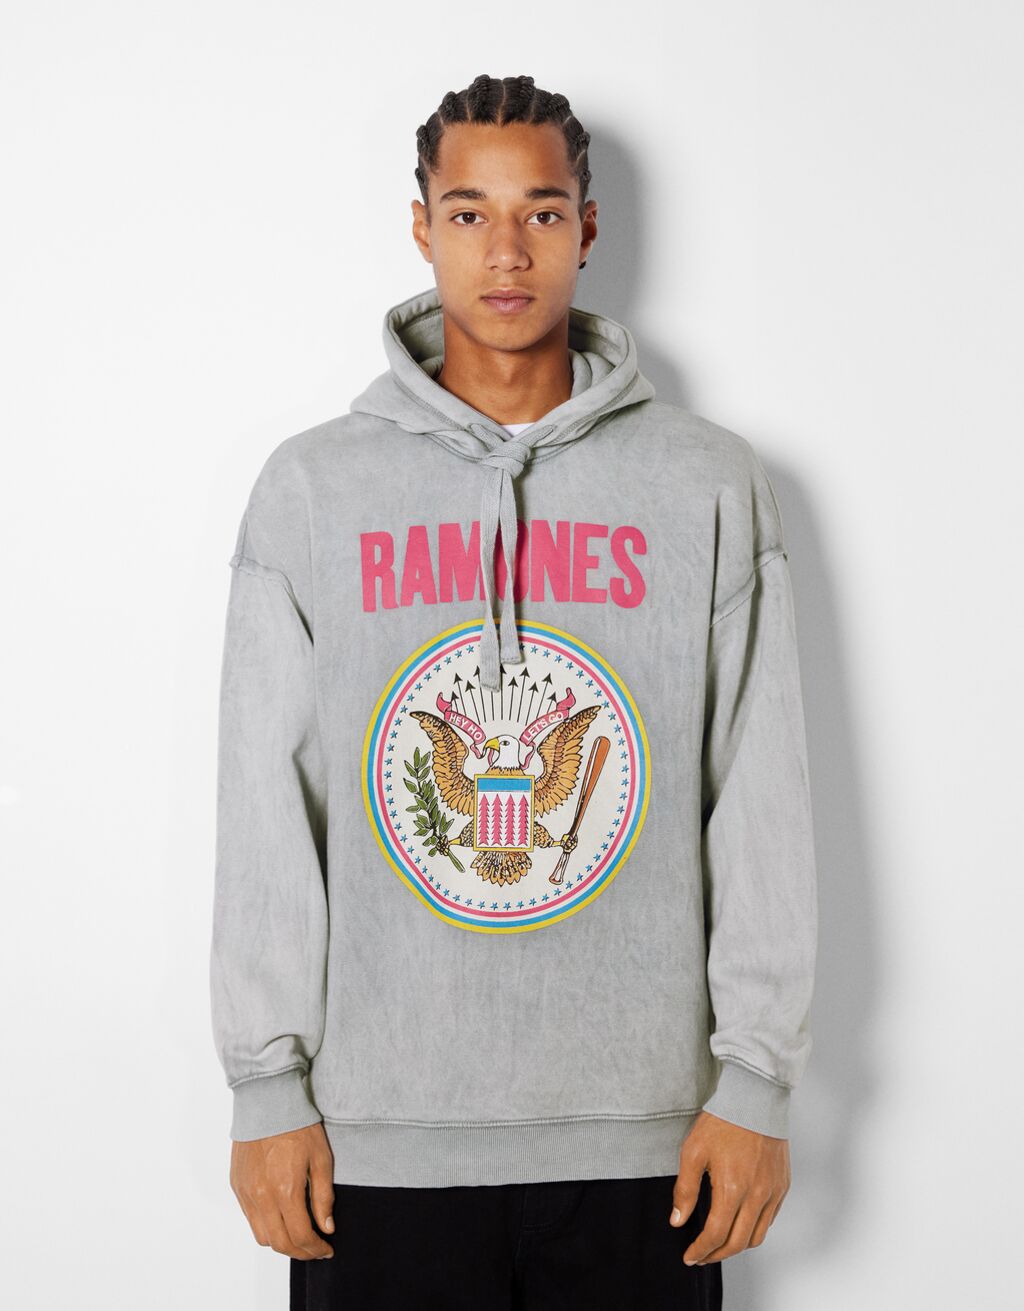 Ramones print hoodie with a faded effect